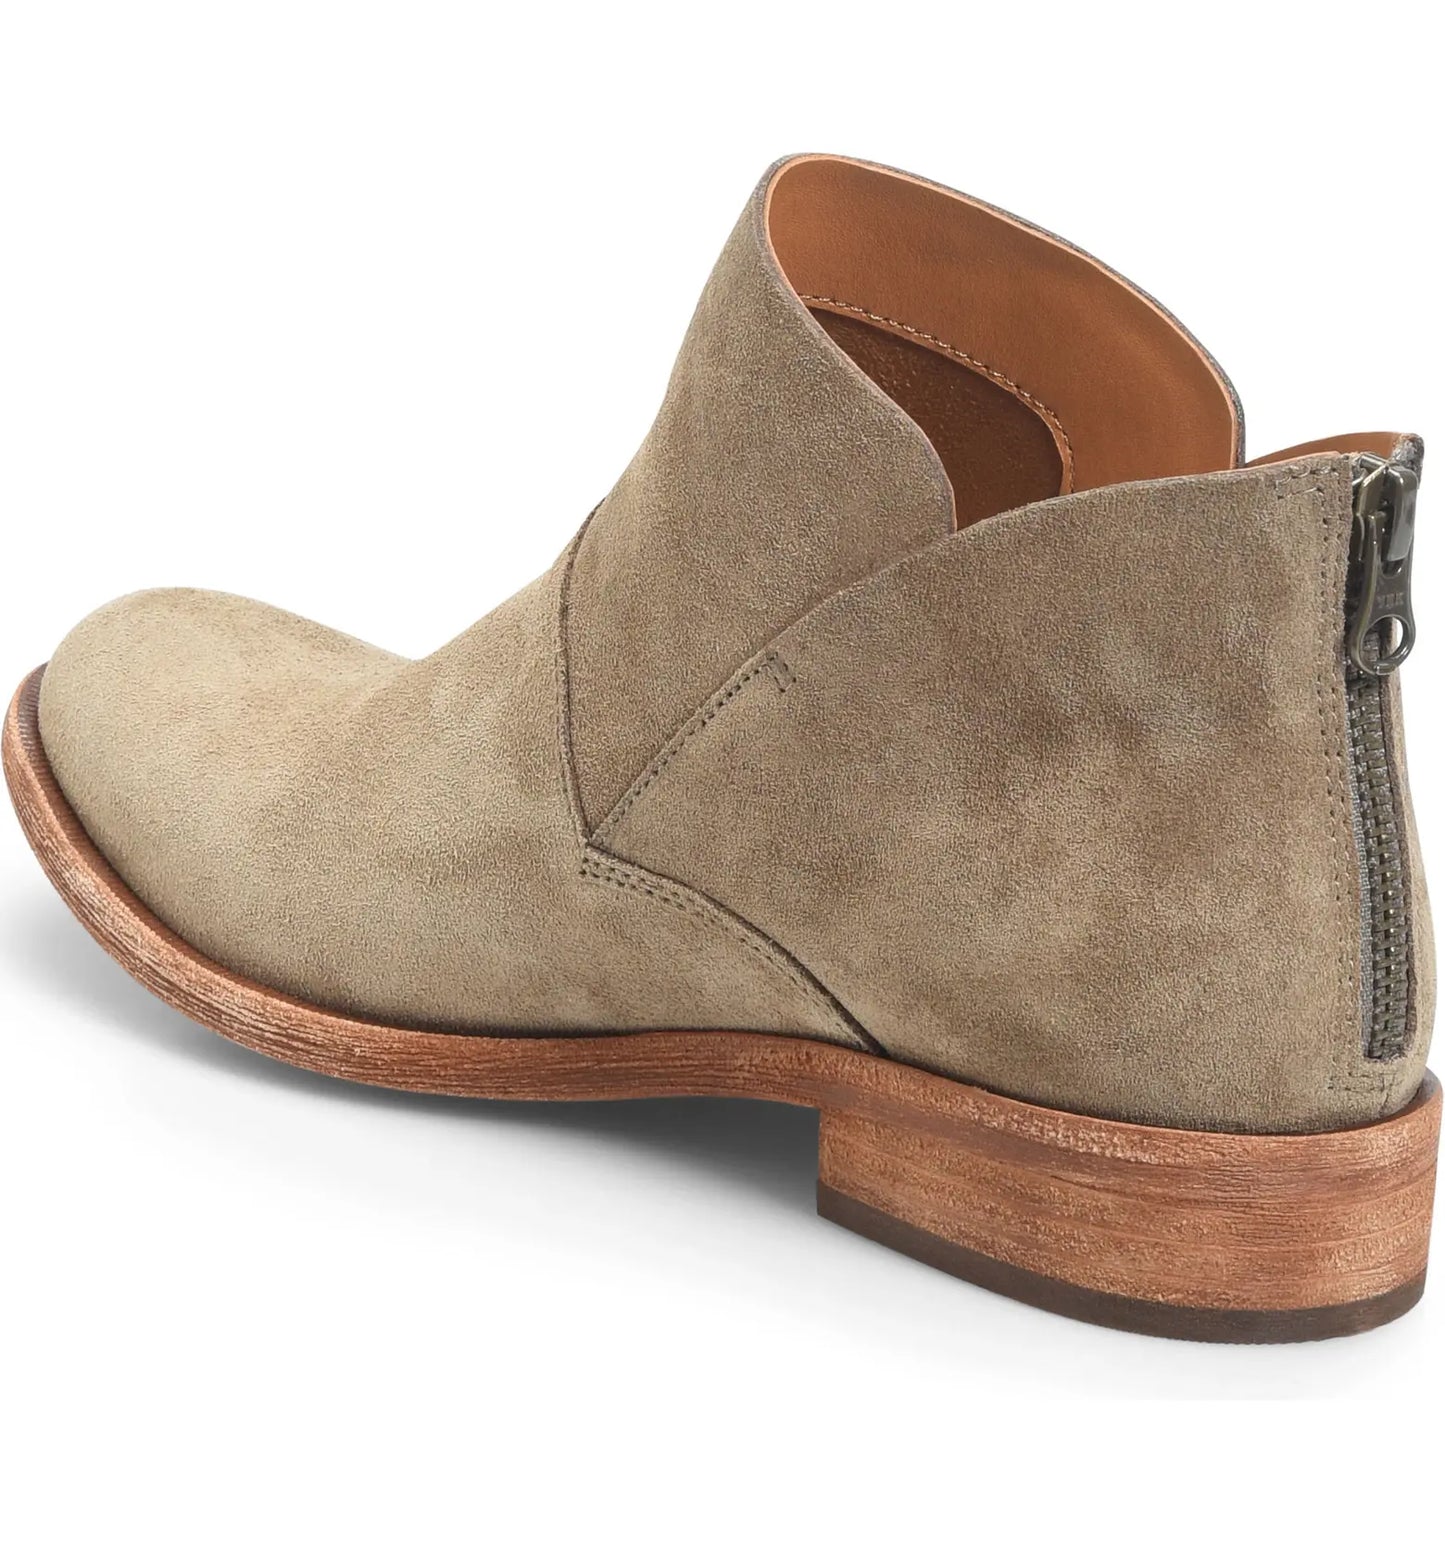 Kork-Ease Ryder Ankle Boot - Taupe/Marmotta Suede